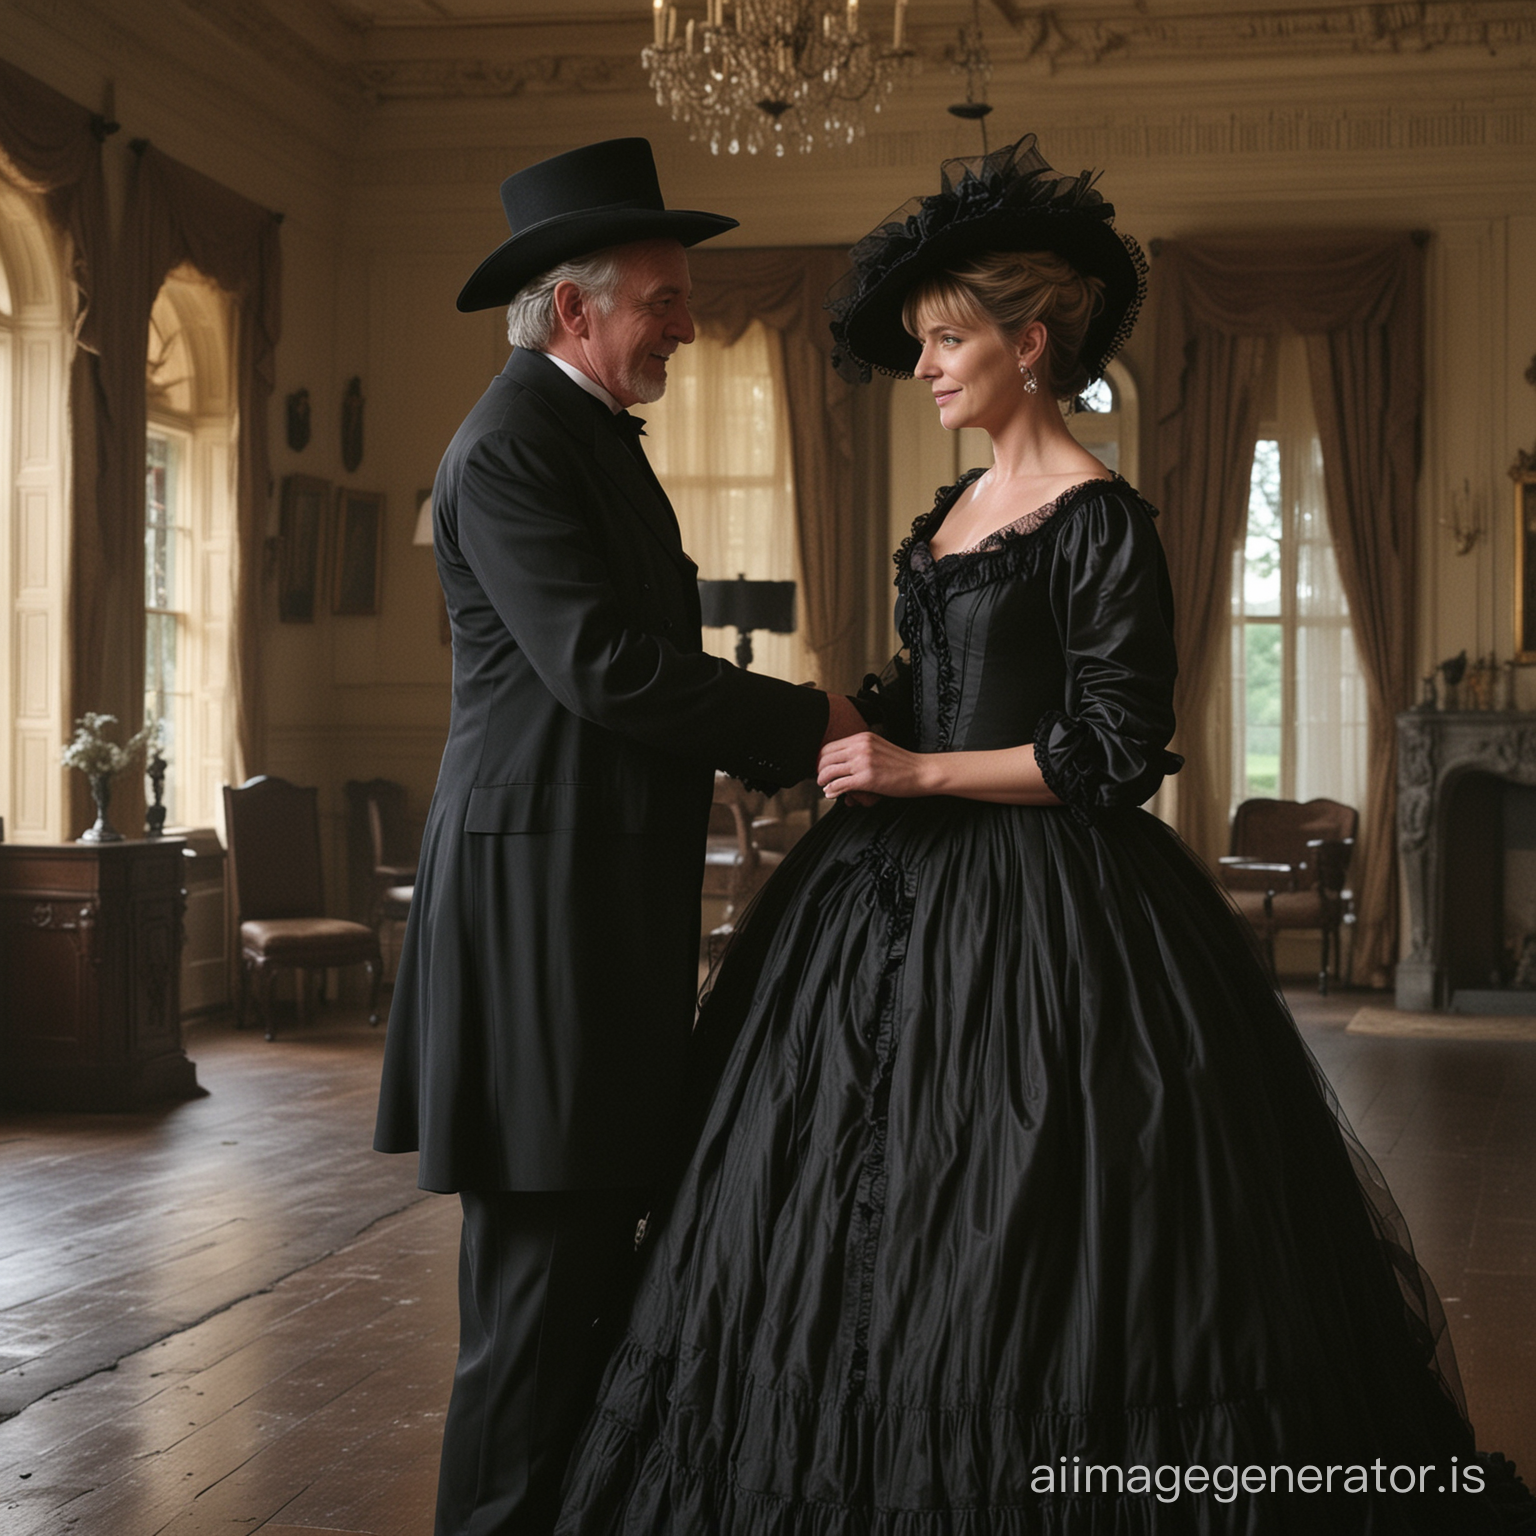 Amanda Tapping as Major Samantha Carter wearing a black floor-length loose billowing 1860 Victorian crinoline poofy dress with a frilly bonnet in a Victorian era mansion dancing with an old man dressed into a black Victorian suit who seems to be her newlywed husband